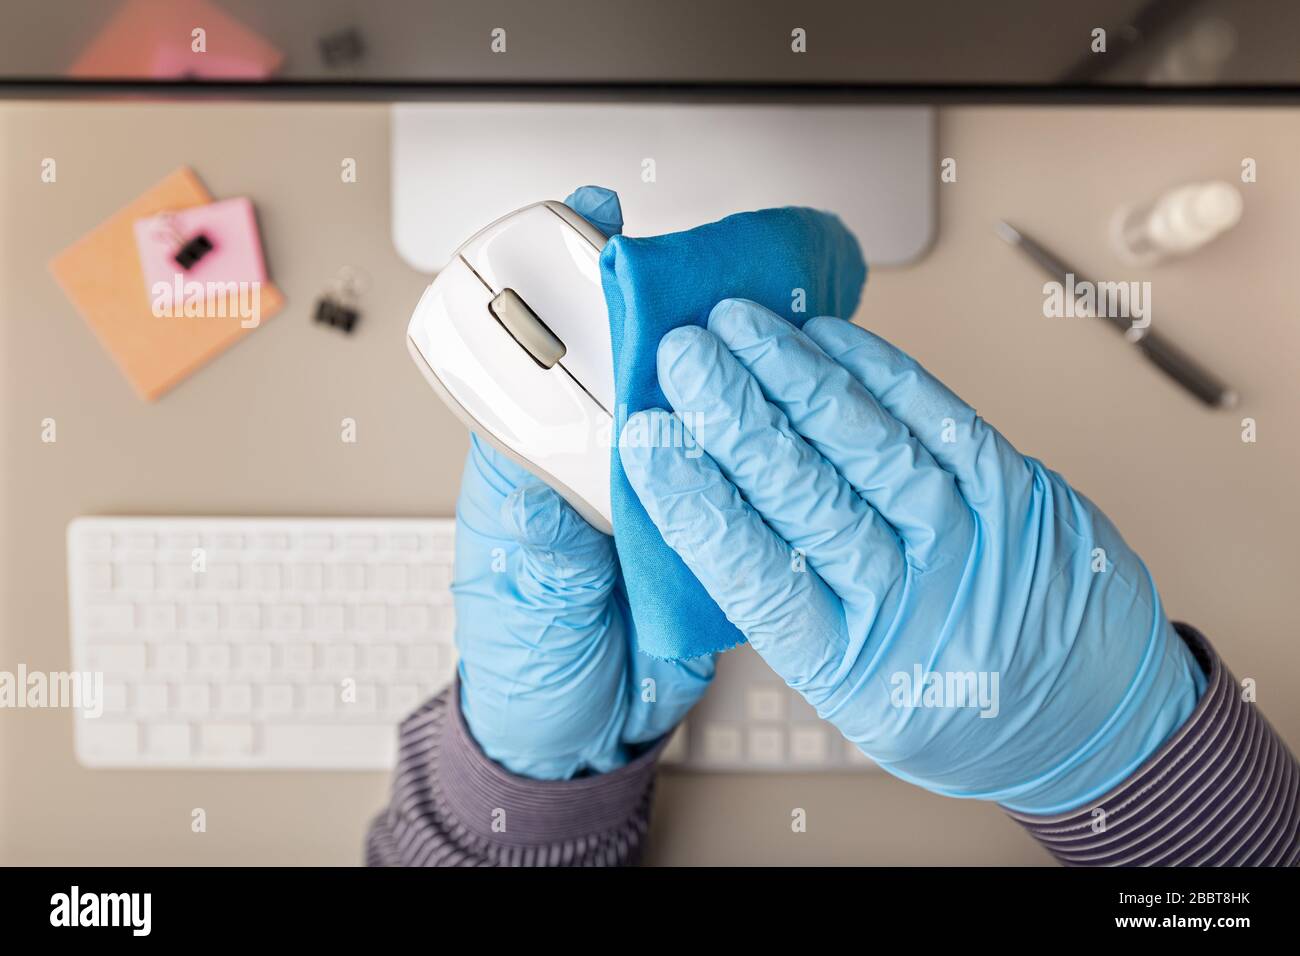 Hand with protective glove cleaning a computer mouse with disinfectant. COVID-19 Coronavirus outbreak prevention concept. Top view Stock Photo